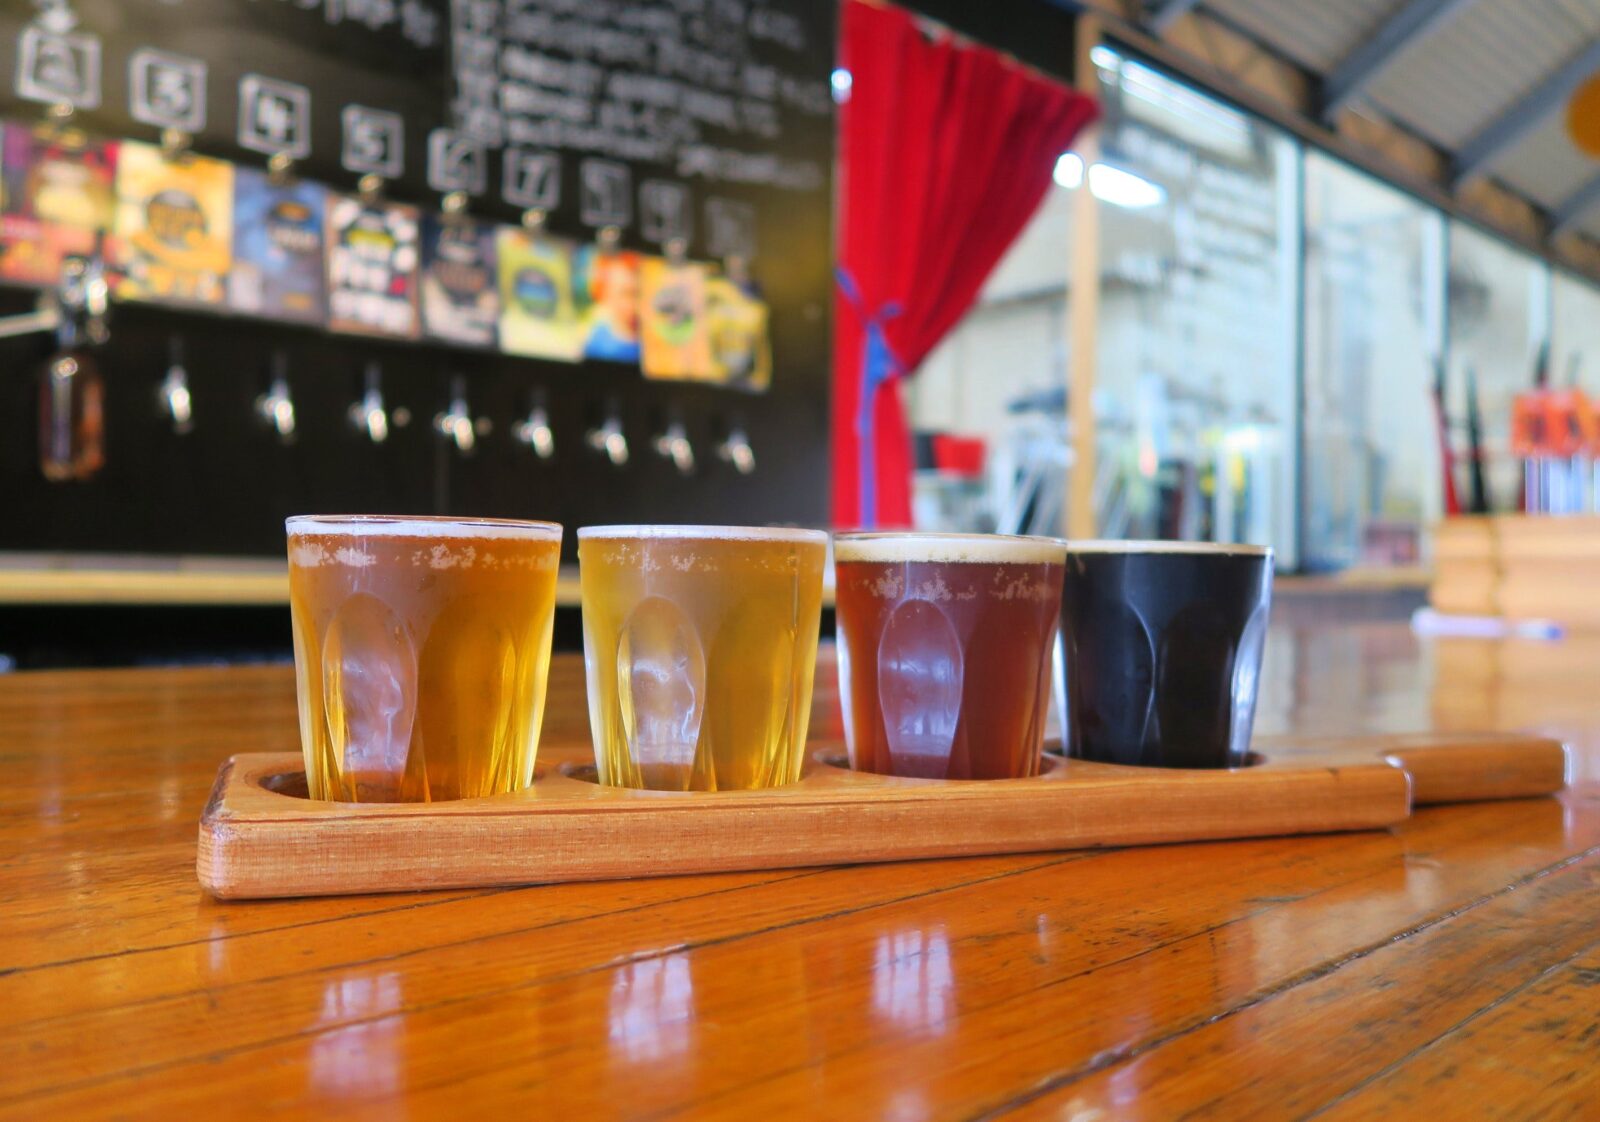 Enjoy a tasting paddle: choose from 10 beers